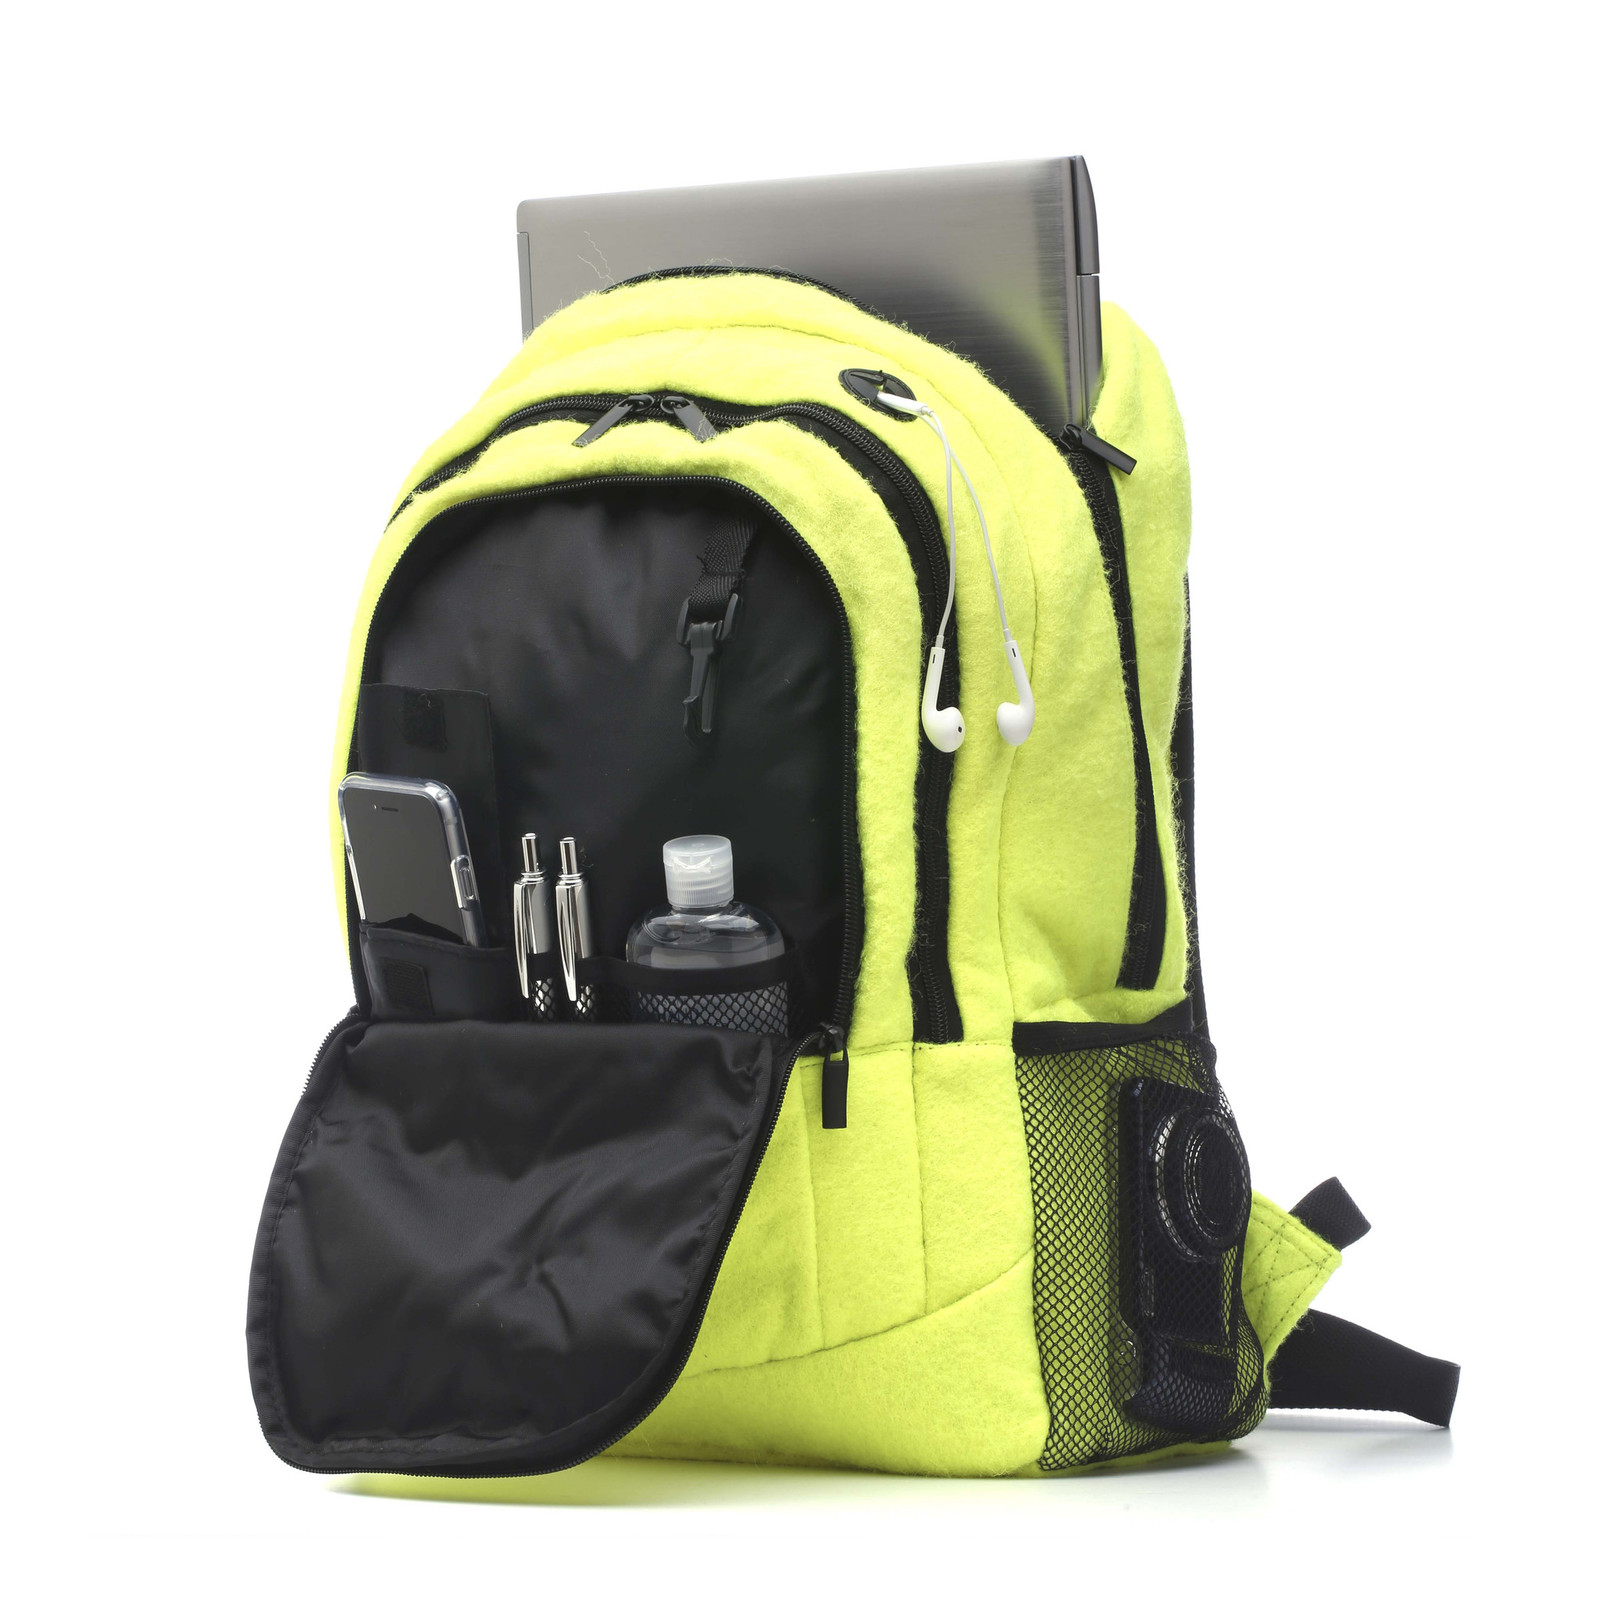 Sport Backpack Actual Tennis Leather fully padded back panel shoulder straps - Equipment Bags